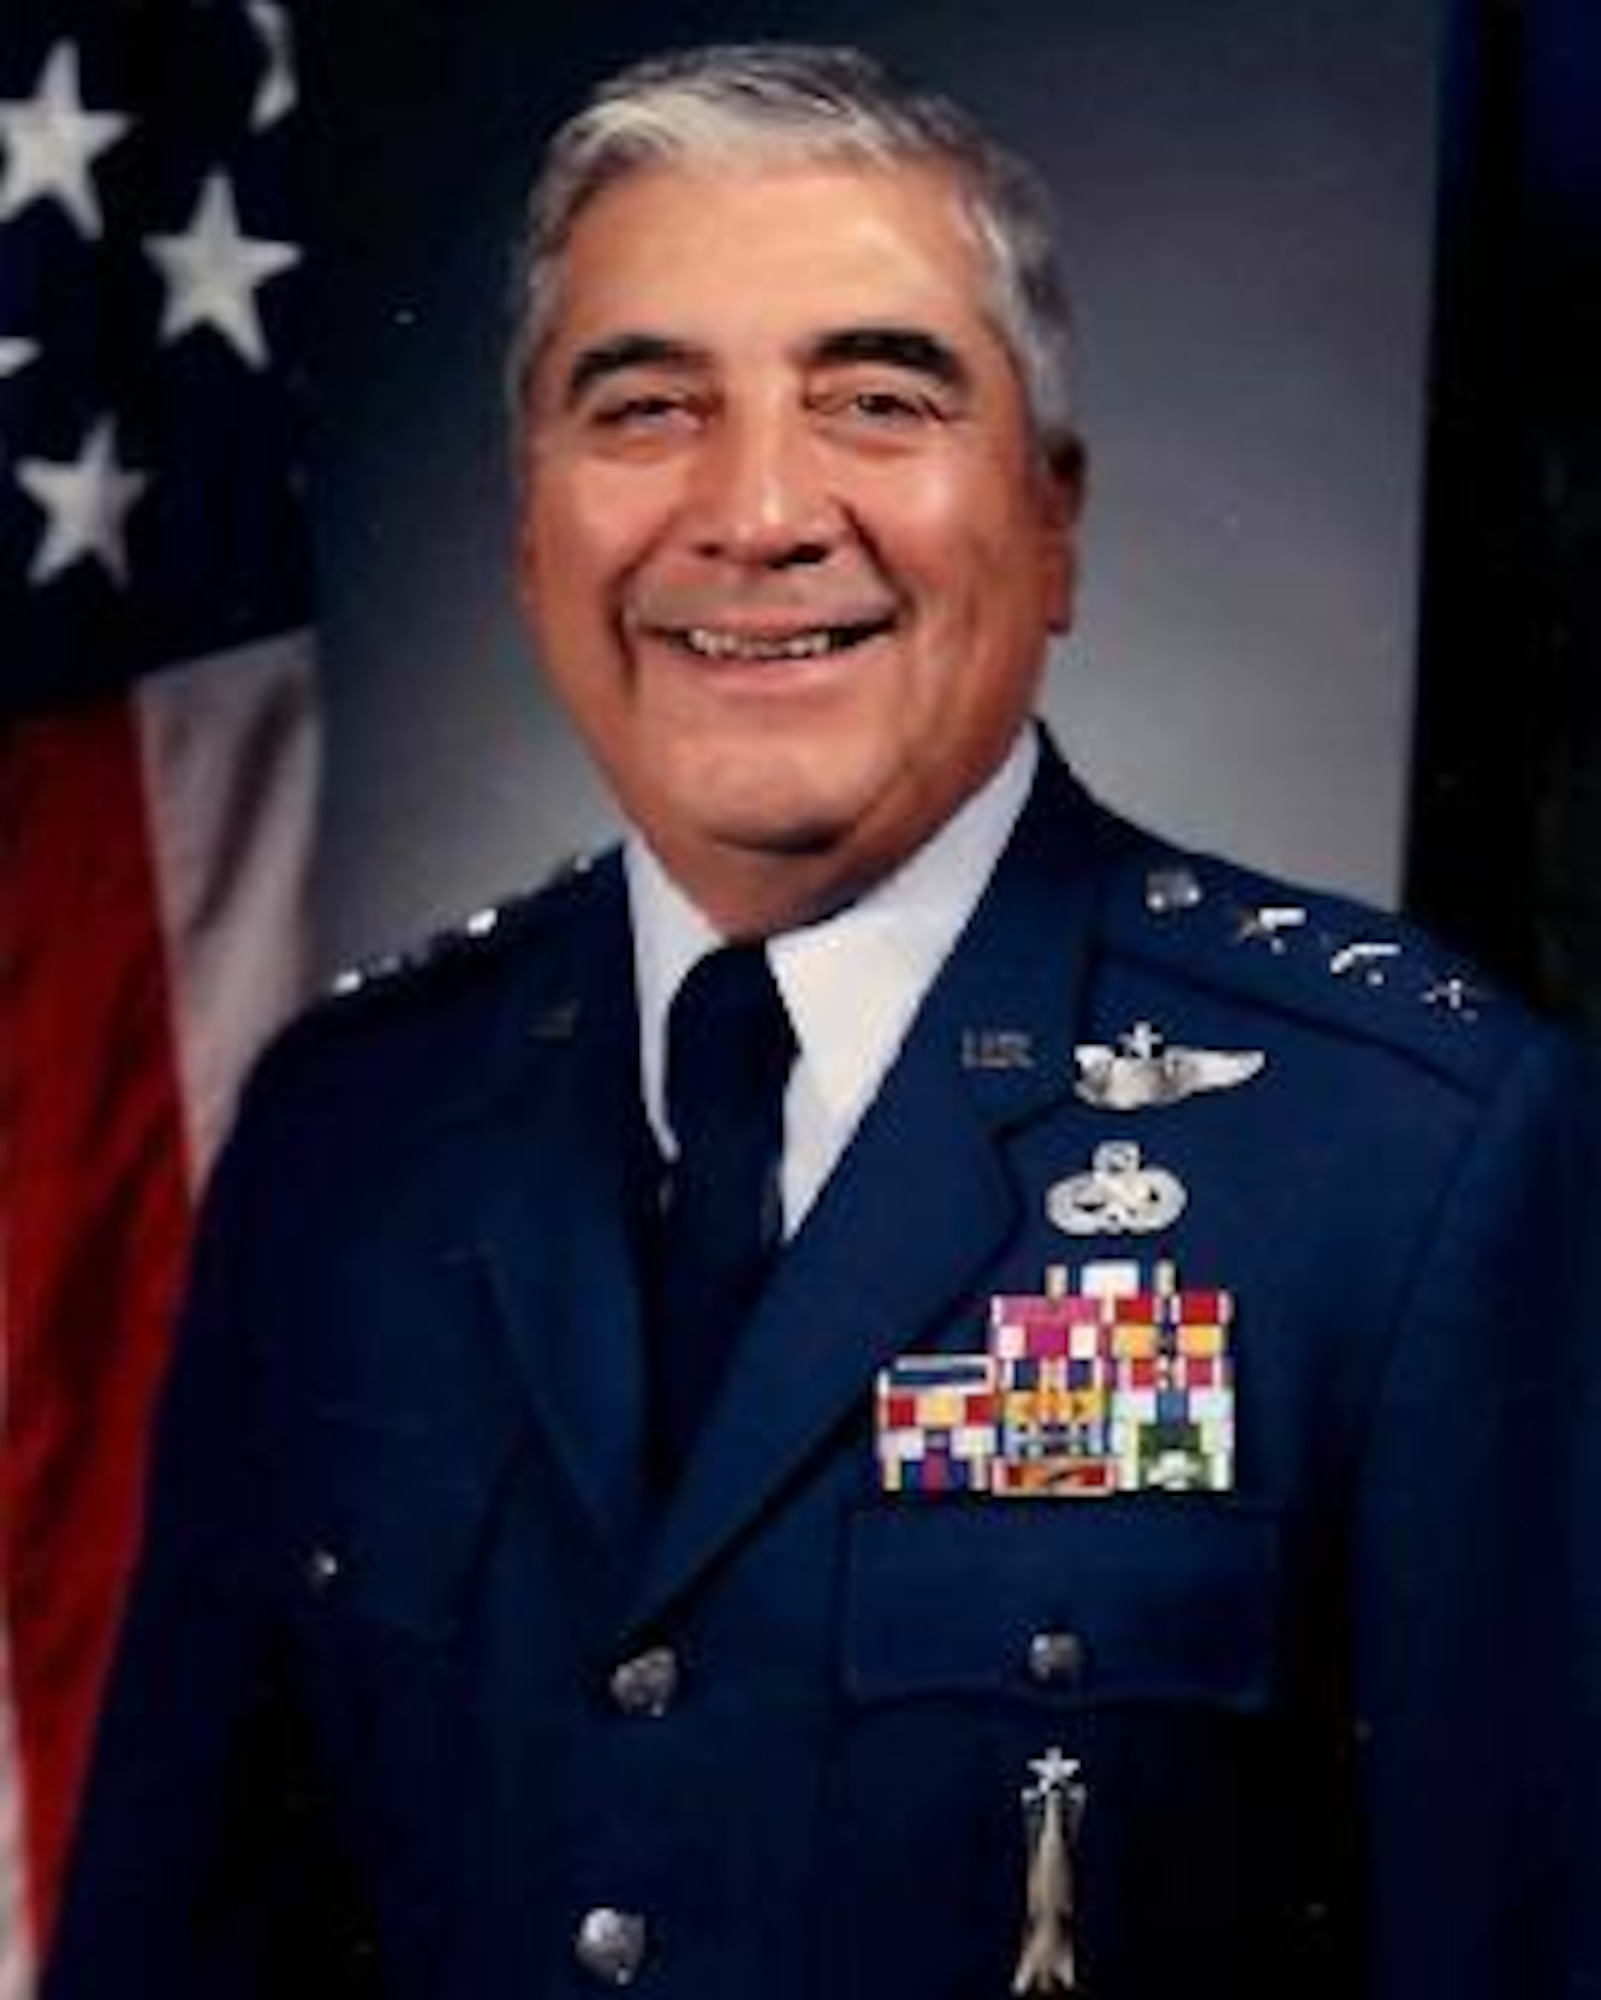 Retired Lt. Gen. Leo Marquez, an Air Force icon, died Dec. 30 in Albuquerque at age 79. Throughout his 33-year career, he is credited with revolutionizing maintenance and logistics operations.